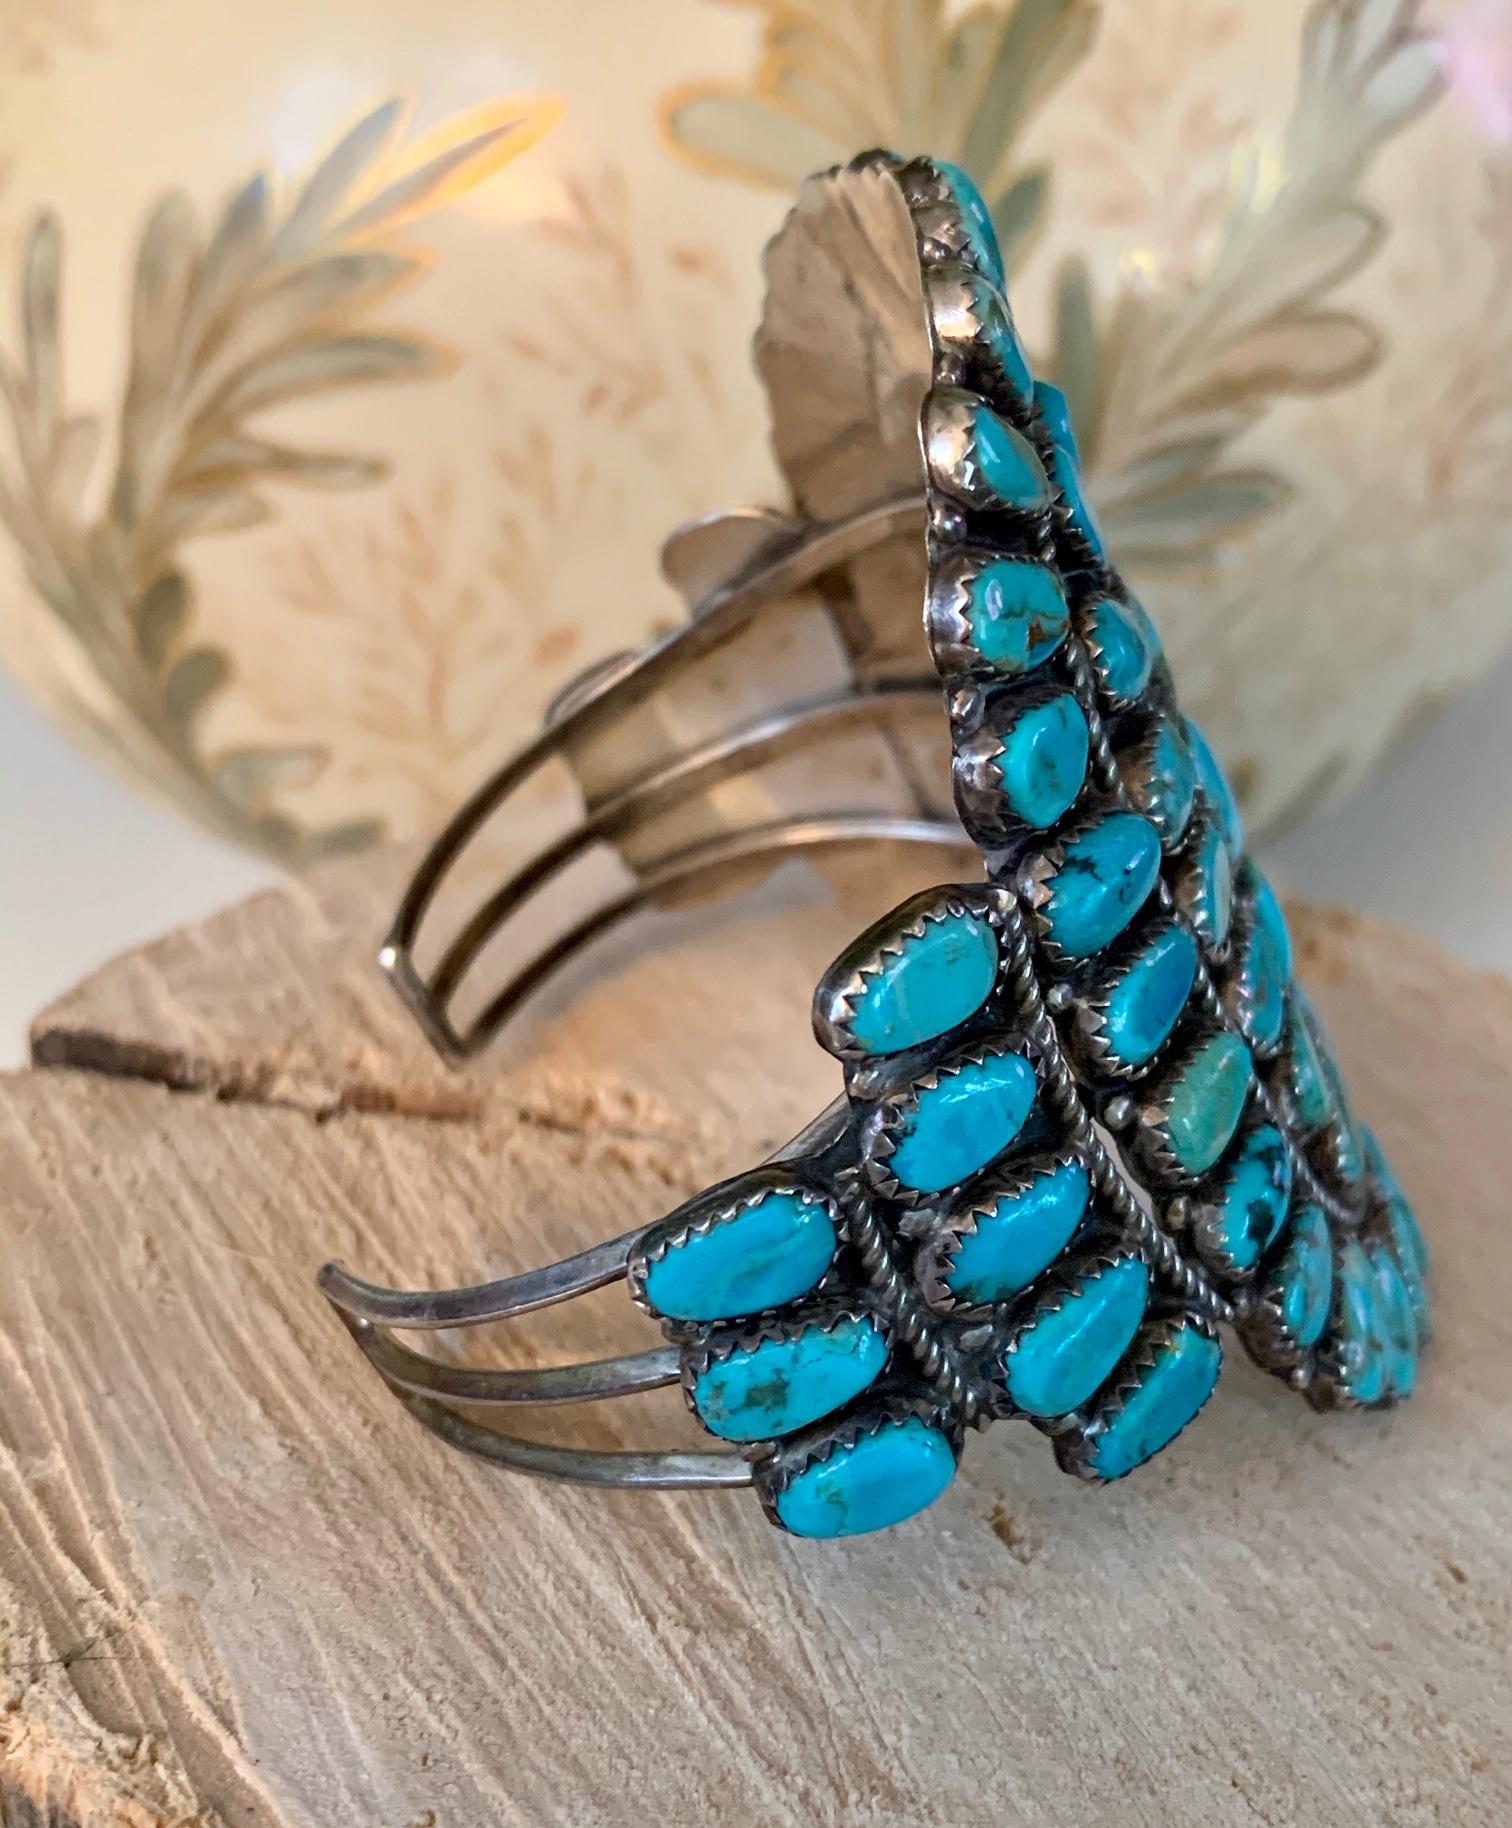 Vintage Native American Turquoise and Silver Cuff/Bracelet 1